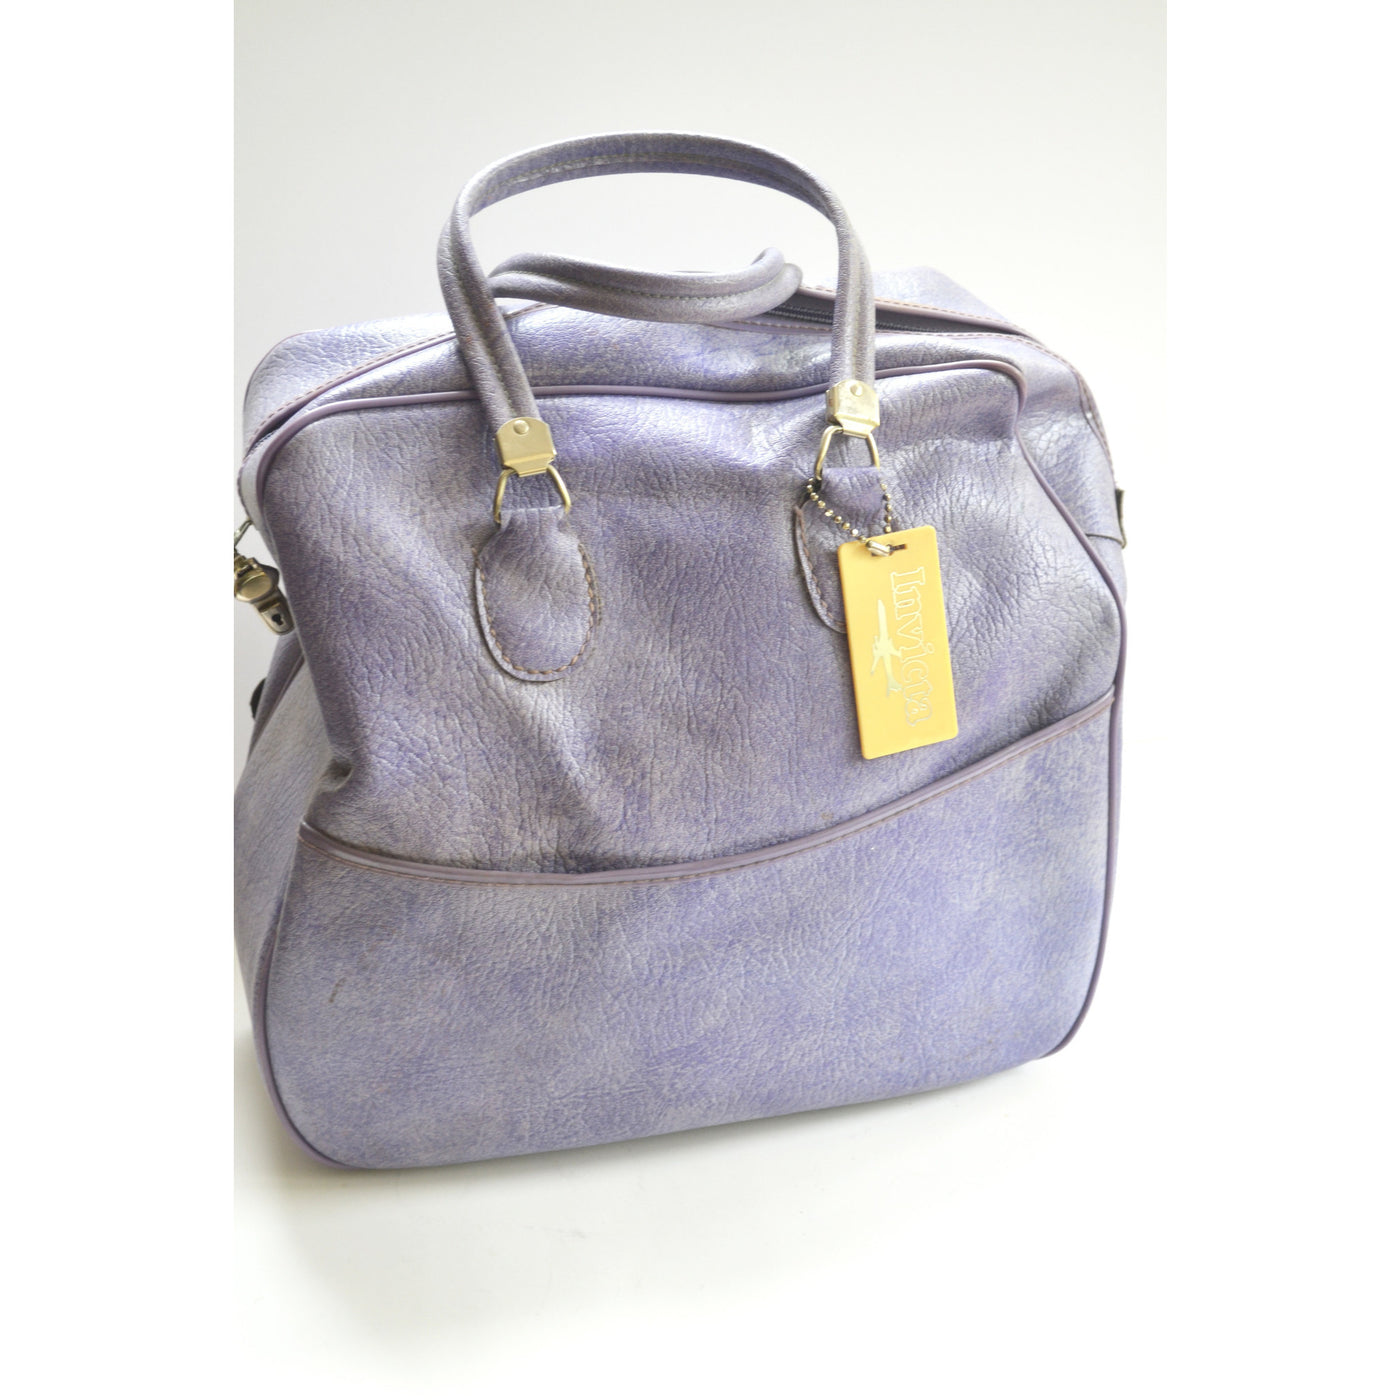 Vintage Purple Carry-All Travel Bag By Invicta 